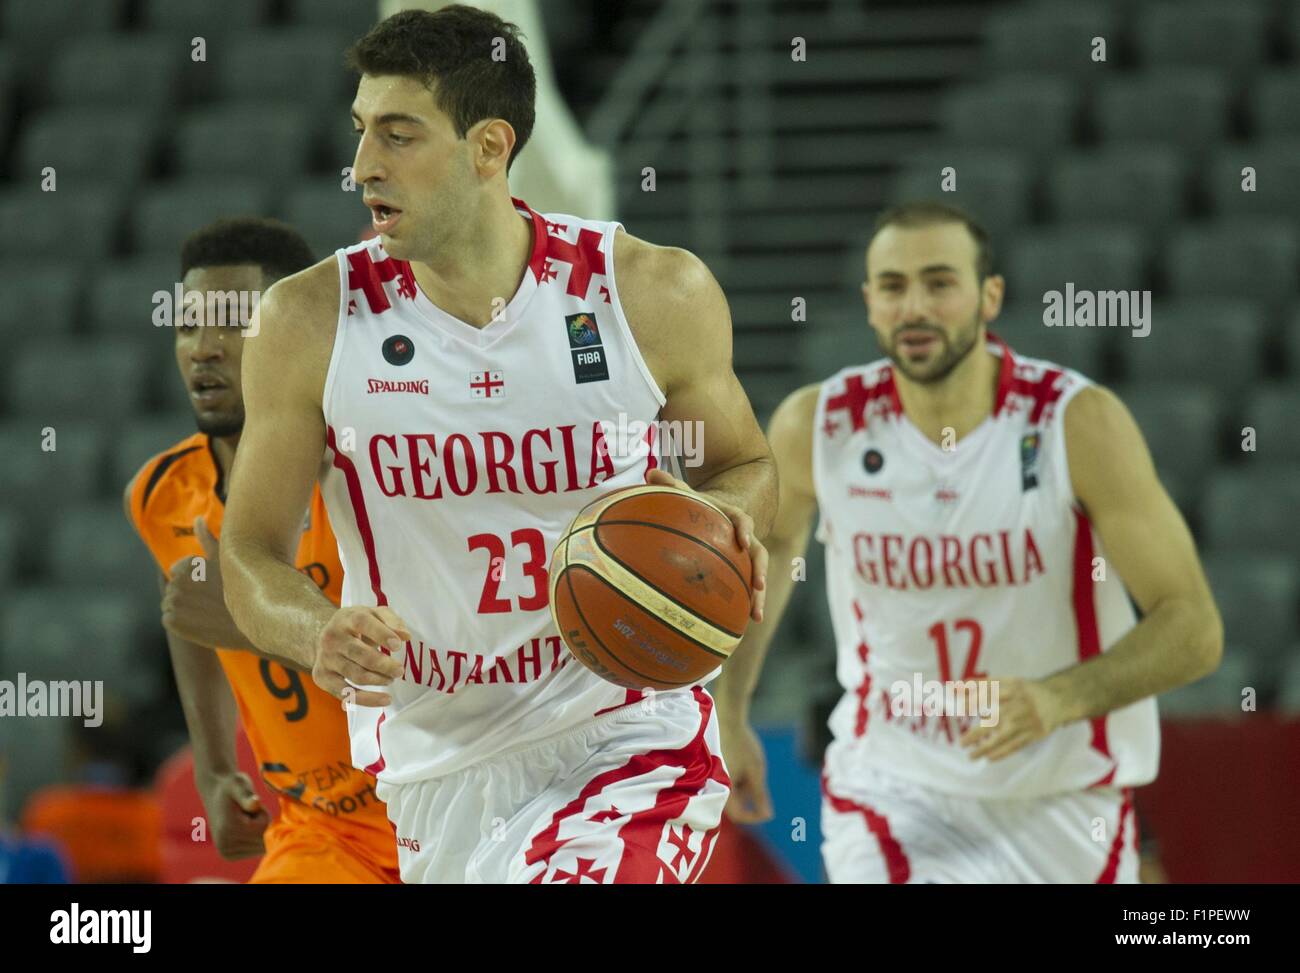 Zagreb, Croatia. 5th Sep, 2015. Tornike Shengelia (C) of Georgia competes during the EuroBasket 2015 Group C match against the Netherlands at Arena Zagreb in Zagreb, capital of Croatia, on Sept. 5, 2015. The Netherlands won 73-72. Credit:  Miso Lisanin/Xinhua/Alamy Live News Stock Photo